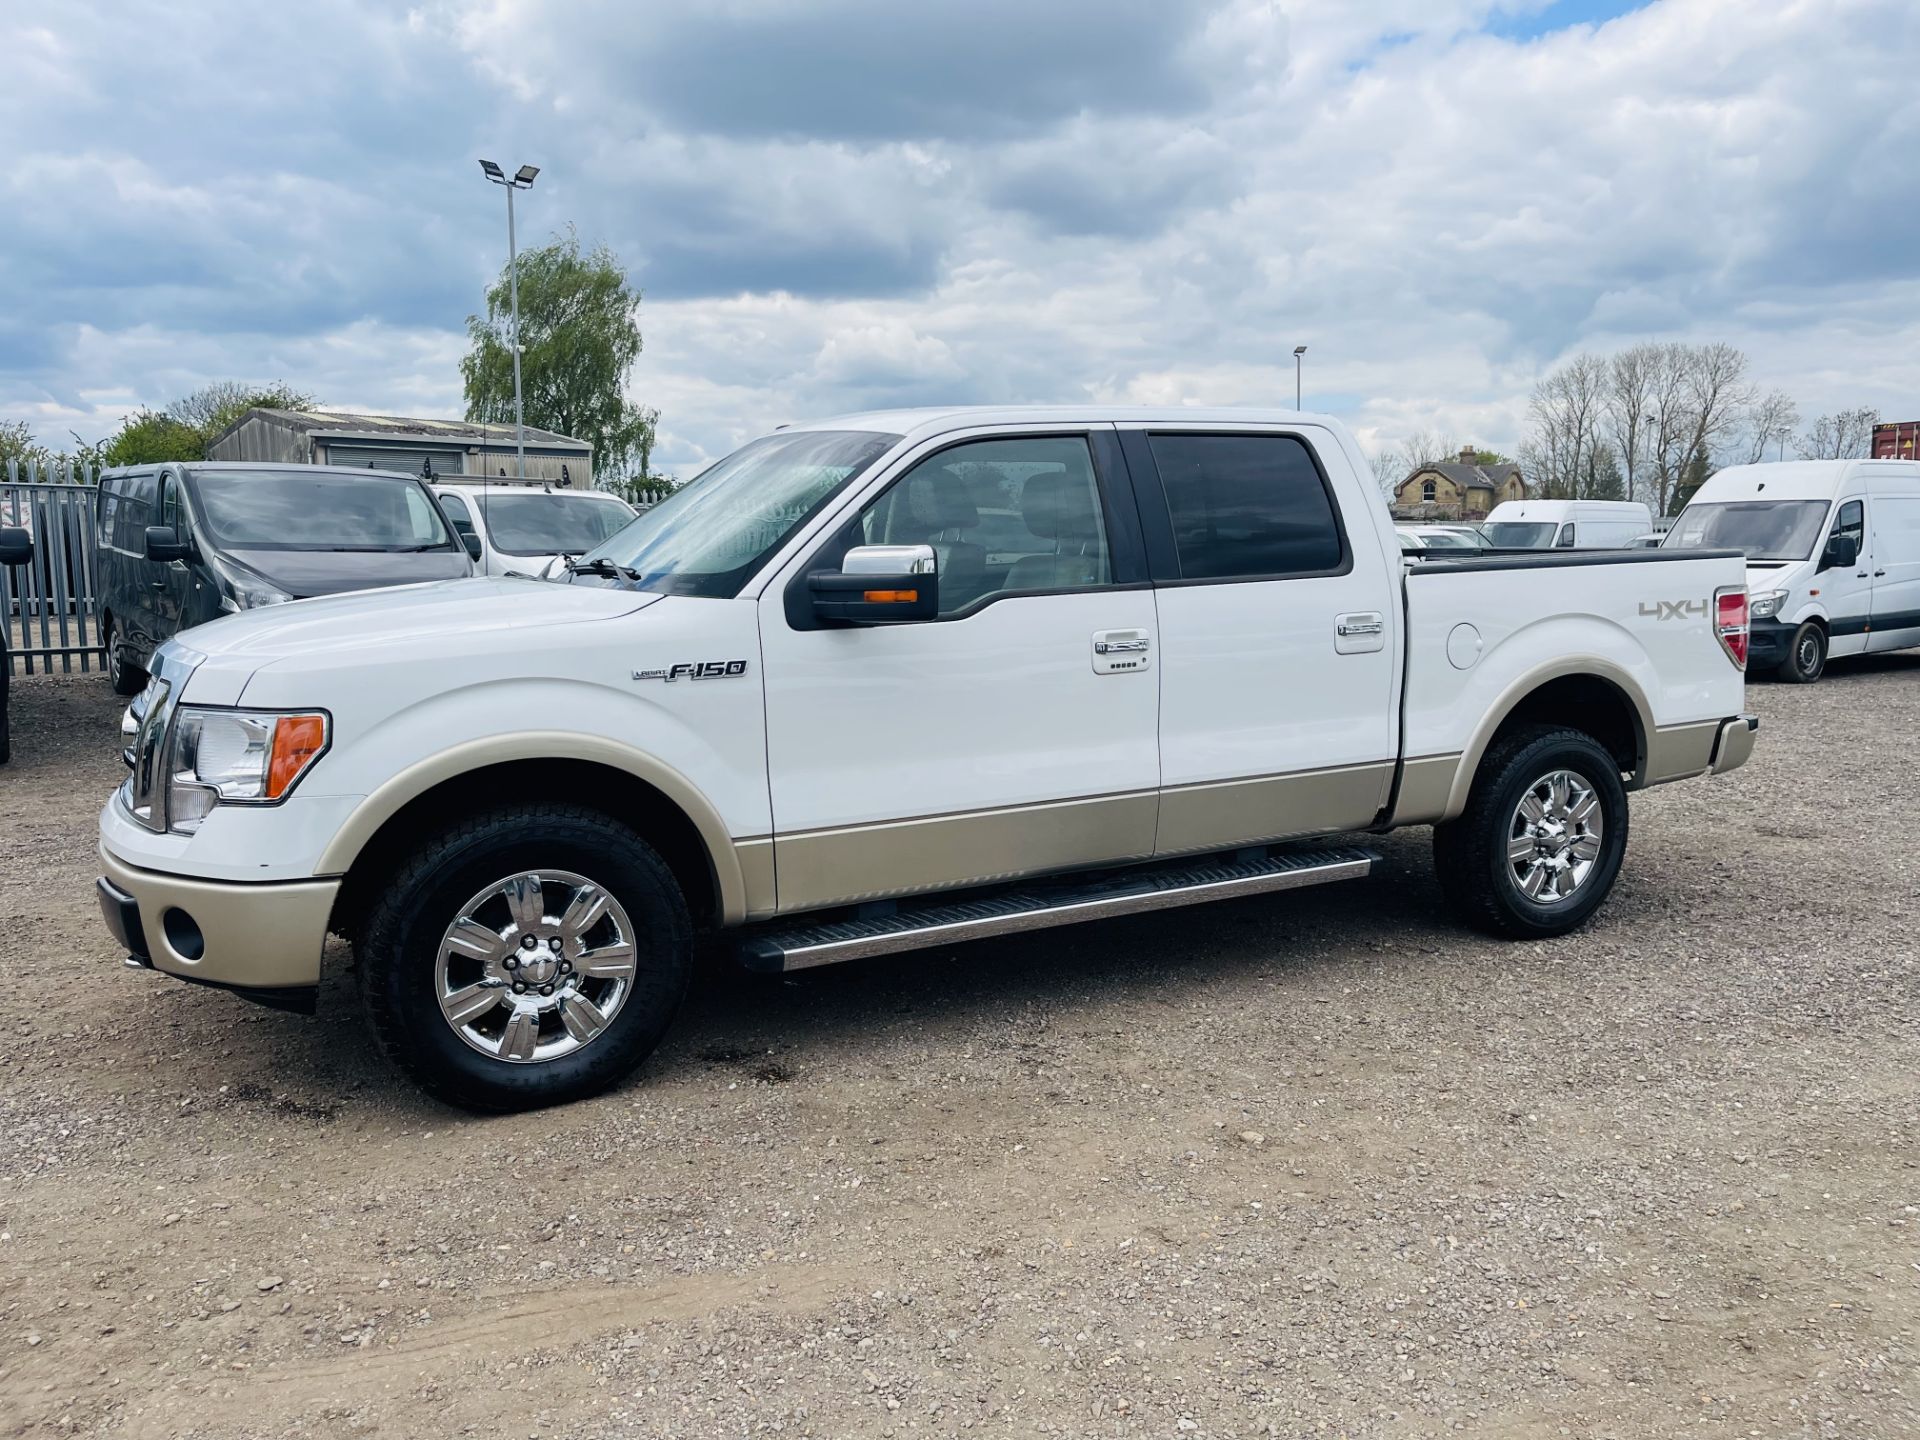 ** ON SALE ** Ford F-150 5.4L V8 Lariat Supercrew 4WD ' 2010 Year' A/C - Full Spec - ULEZ Compliant - Image 6 of 29